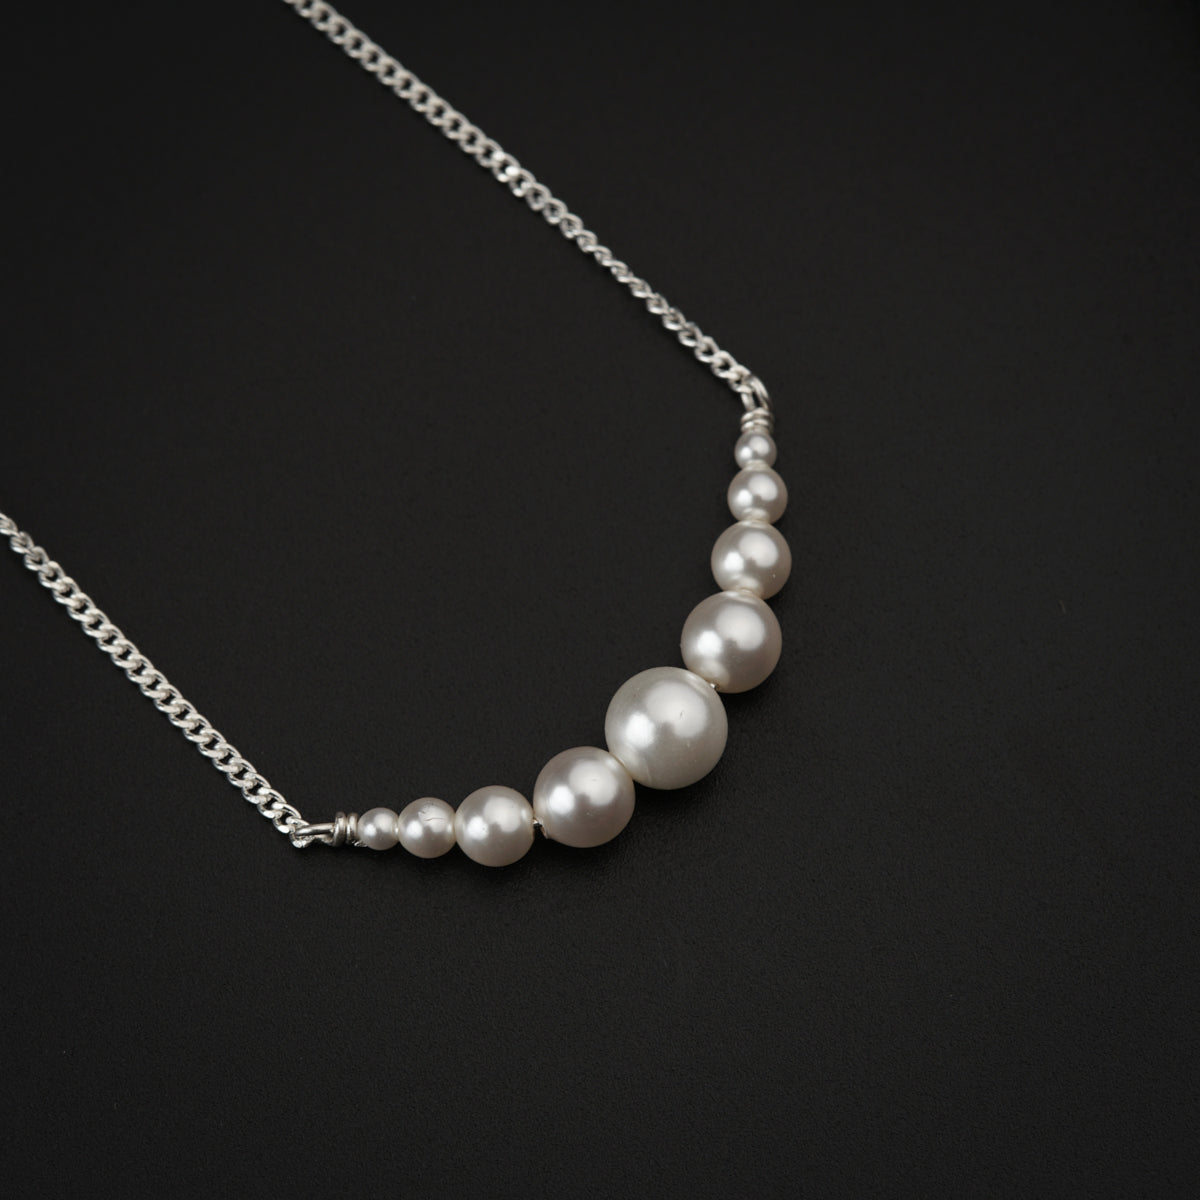 Dainty Pearls Silver Necklace